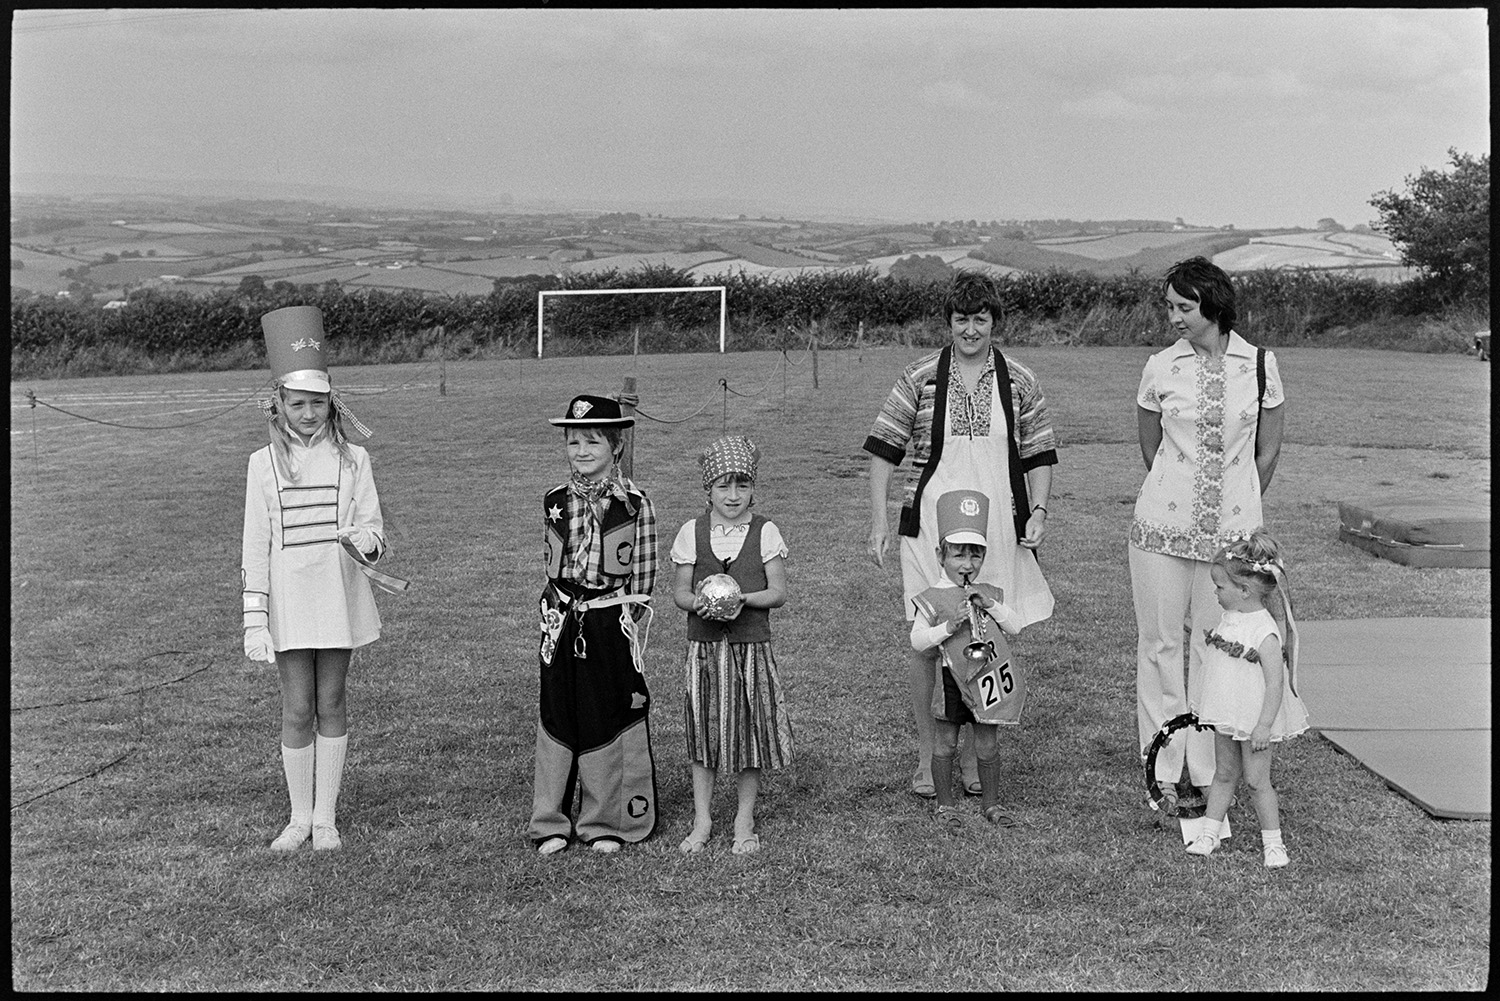 Gymnasts and fancy dress at fete. 
[Five children in fancy dress in a field at Atherington fete. Costumes include a soldier, cowboy and fortune teller. A landscape of fields can be seen in the background.]